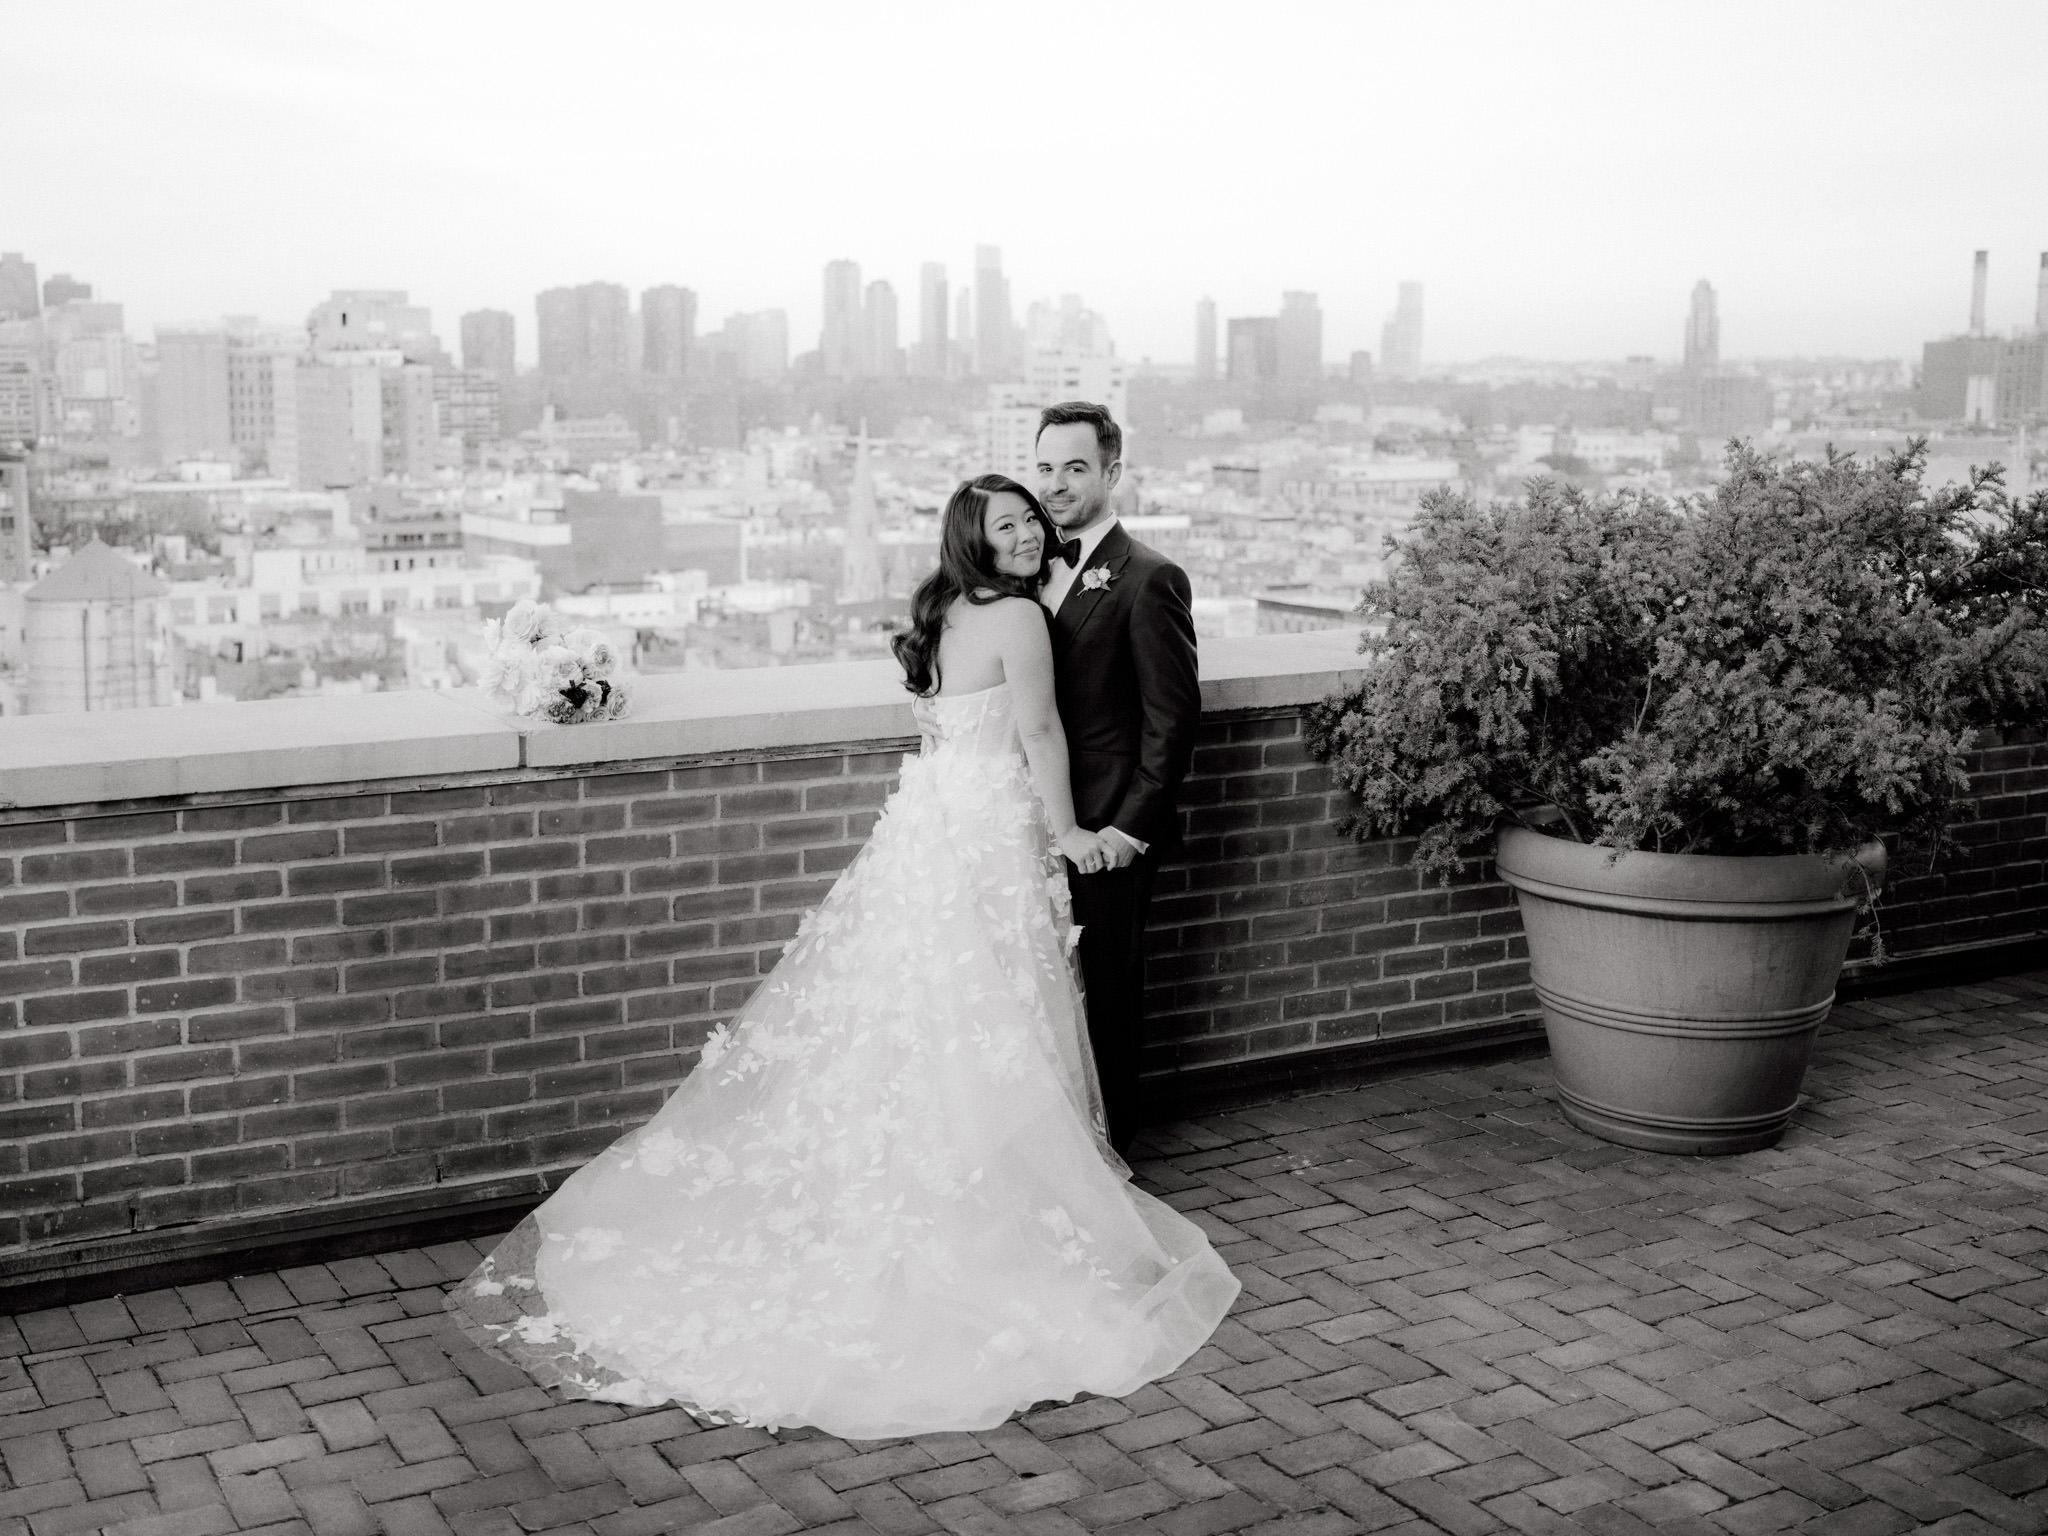 Black and white image of the bride and groom hugging each other with NYC skyscrapers in the background. Image by Jenny Fu Studio